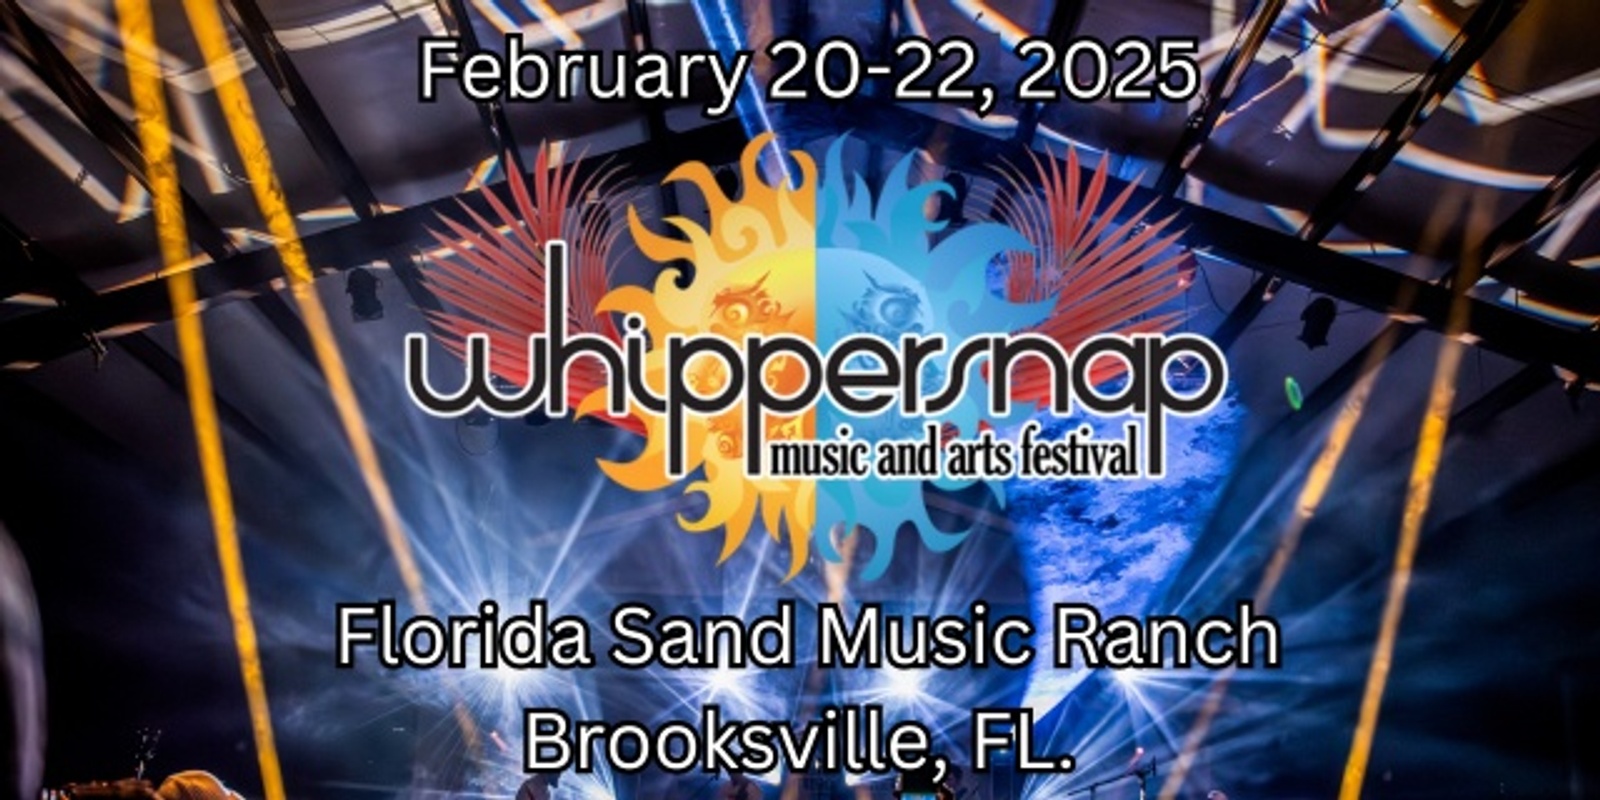 Banner image for Whippersnap Music & Arts Festival 2025